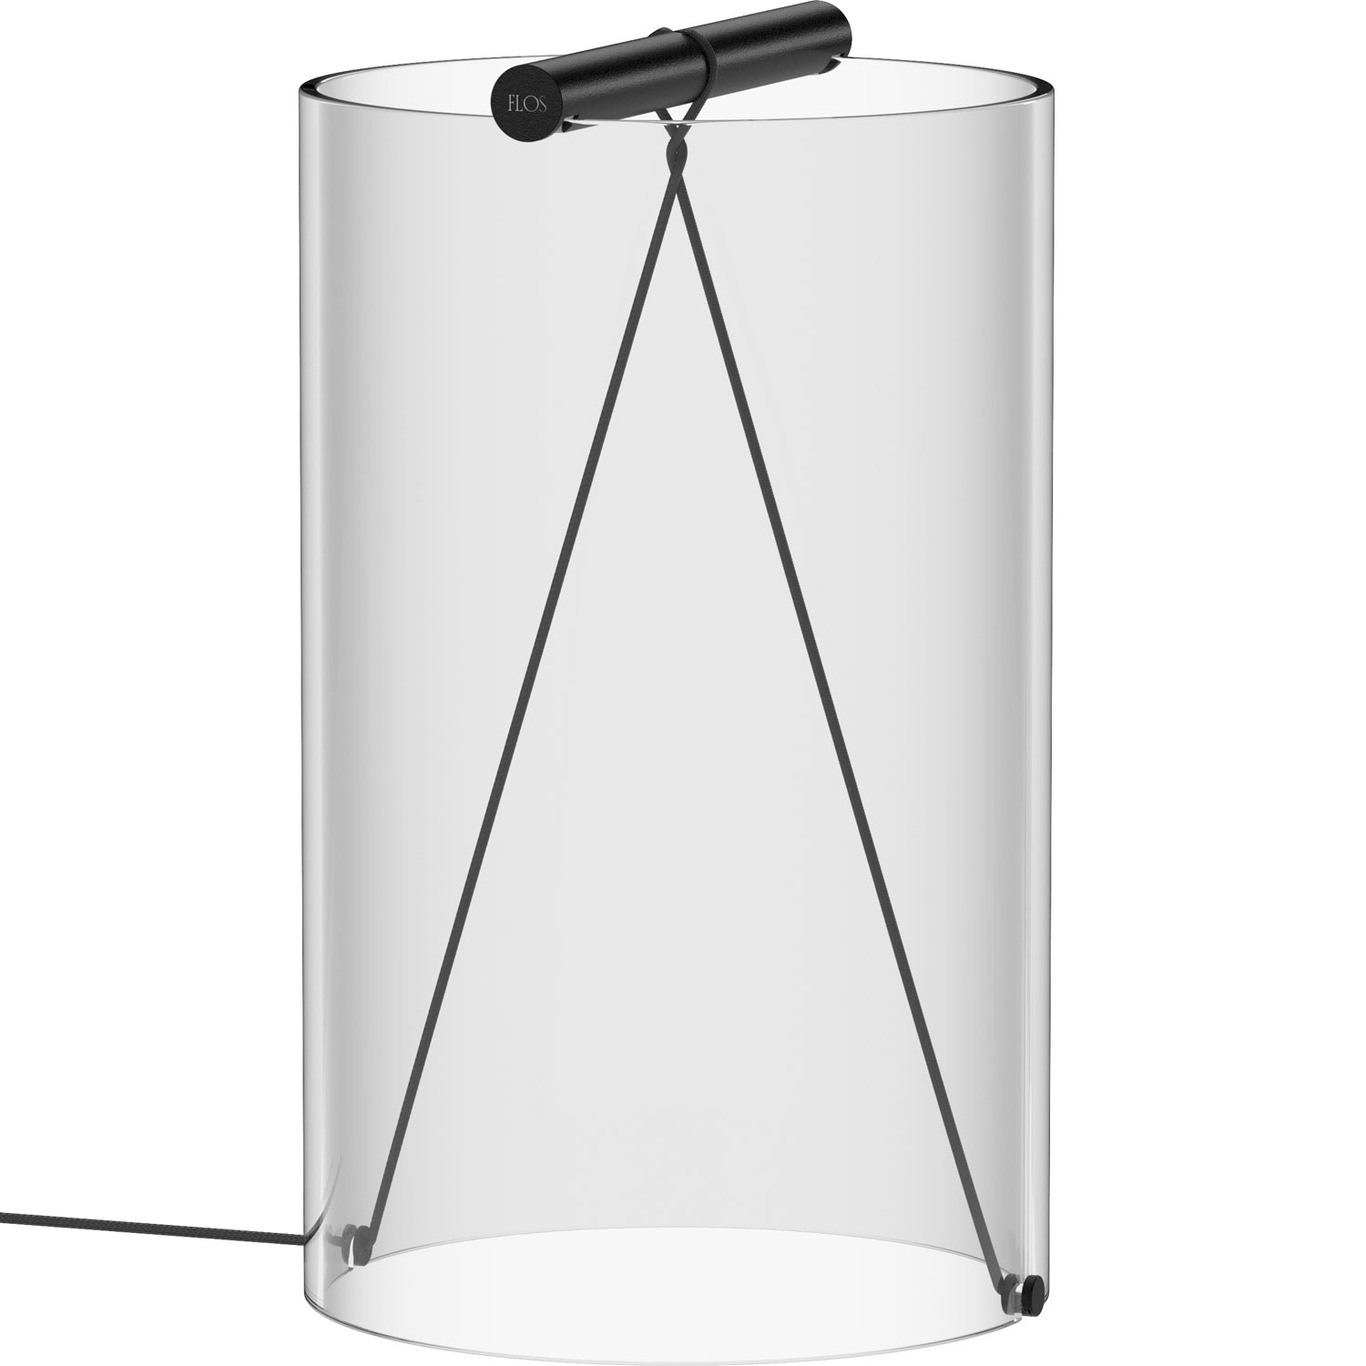 To-Tie T2 Table Lamp, Matte Black